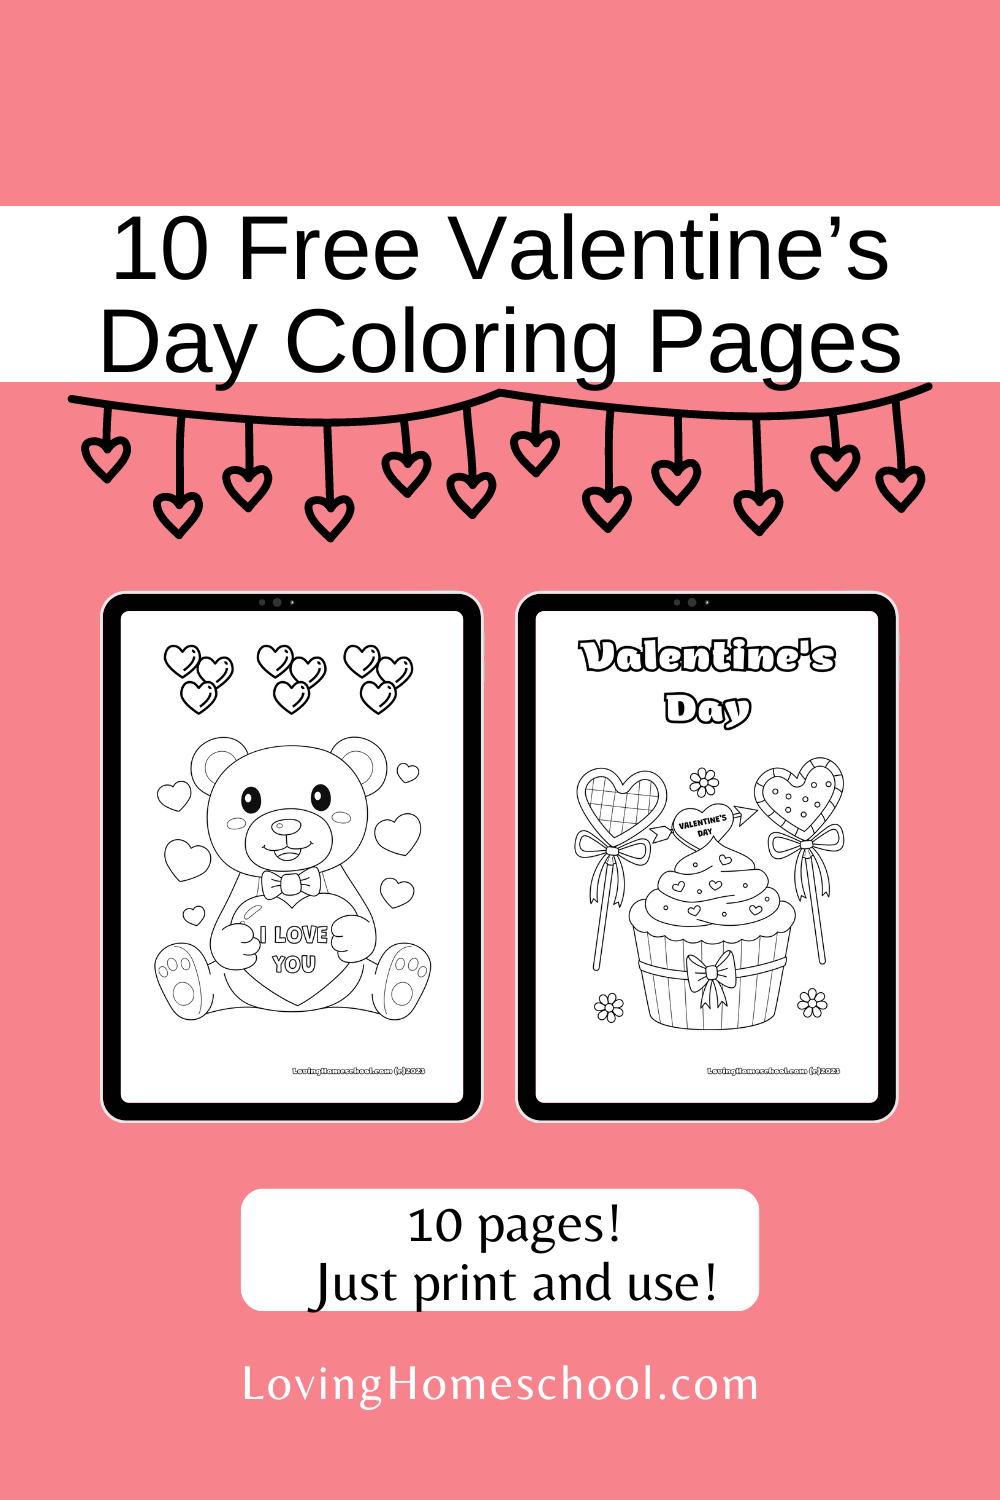 10 Free Valentine’s Day Coloring Pages Pinterest Pin